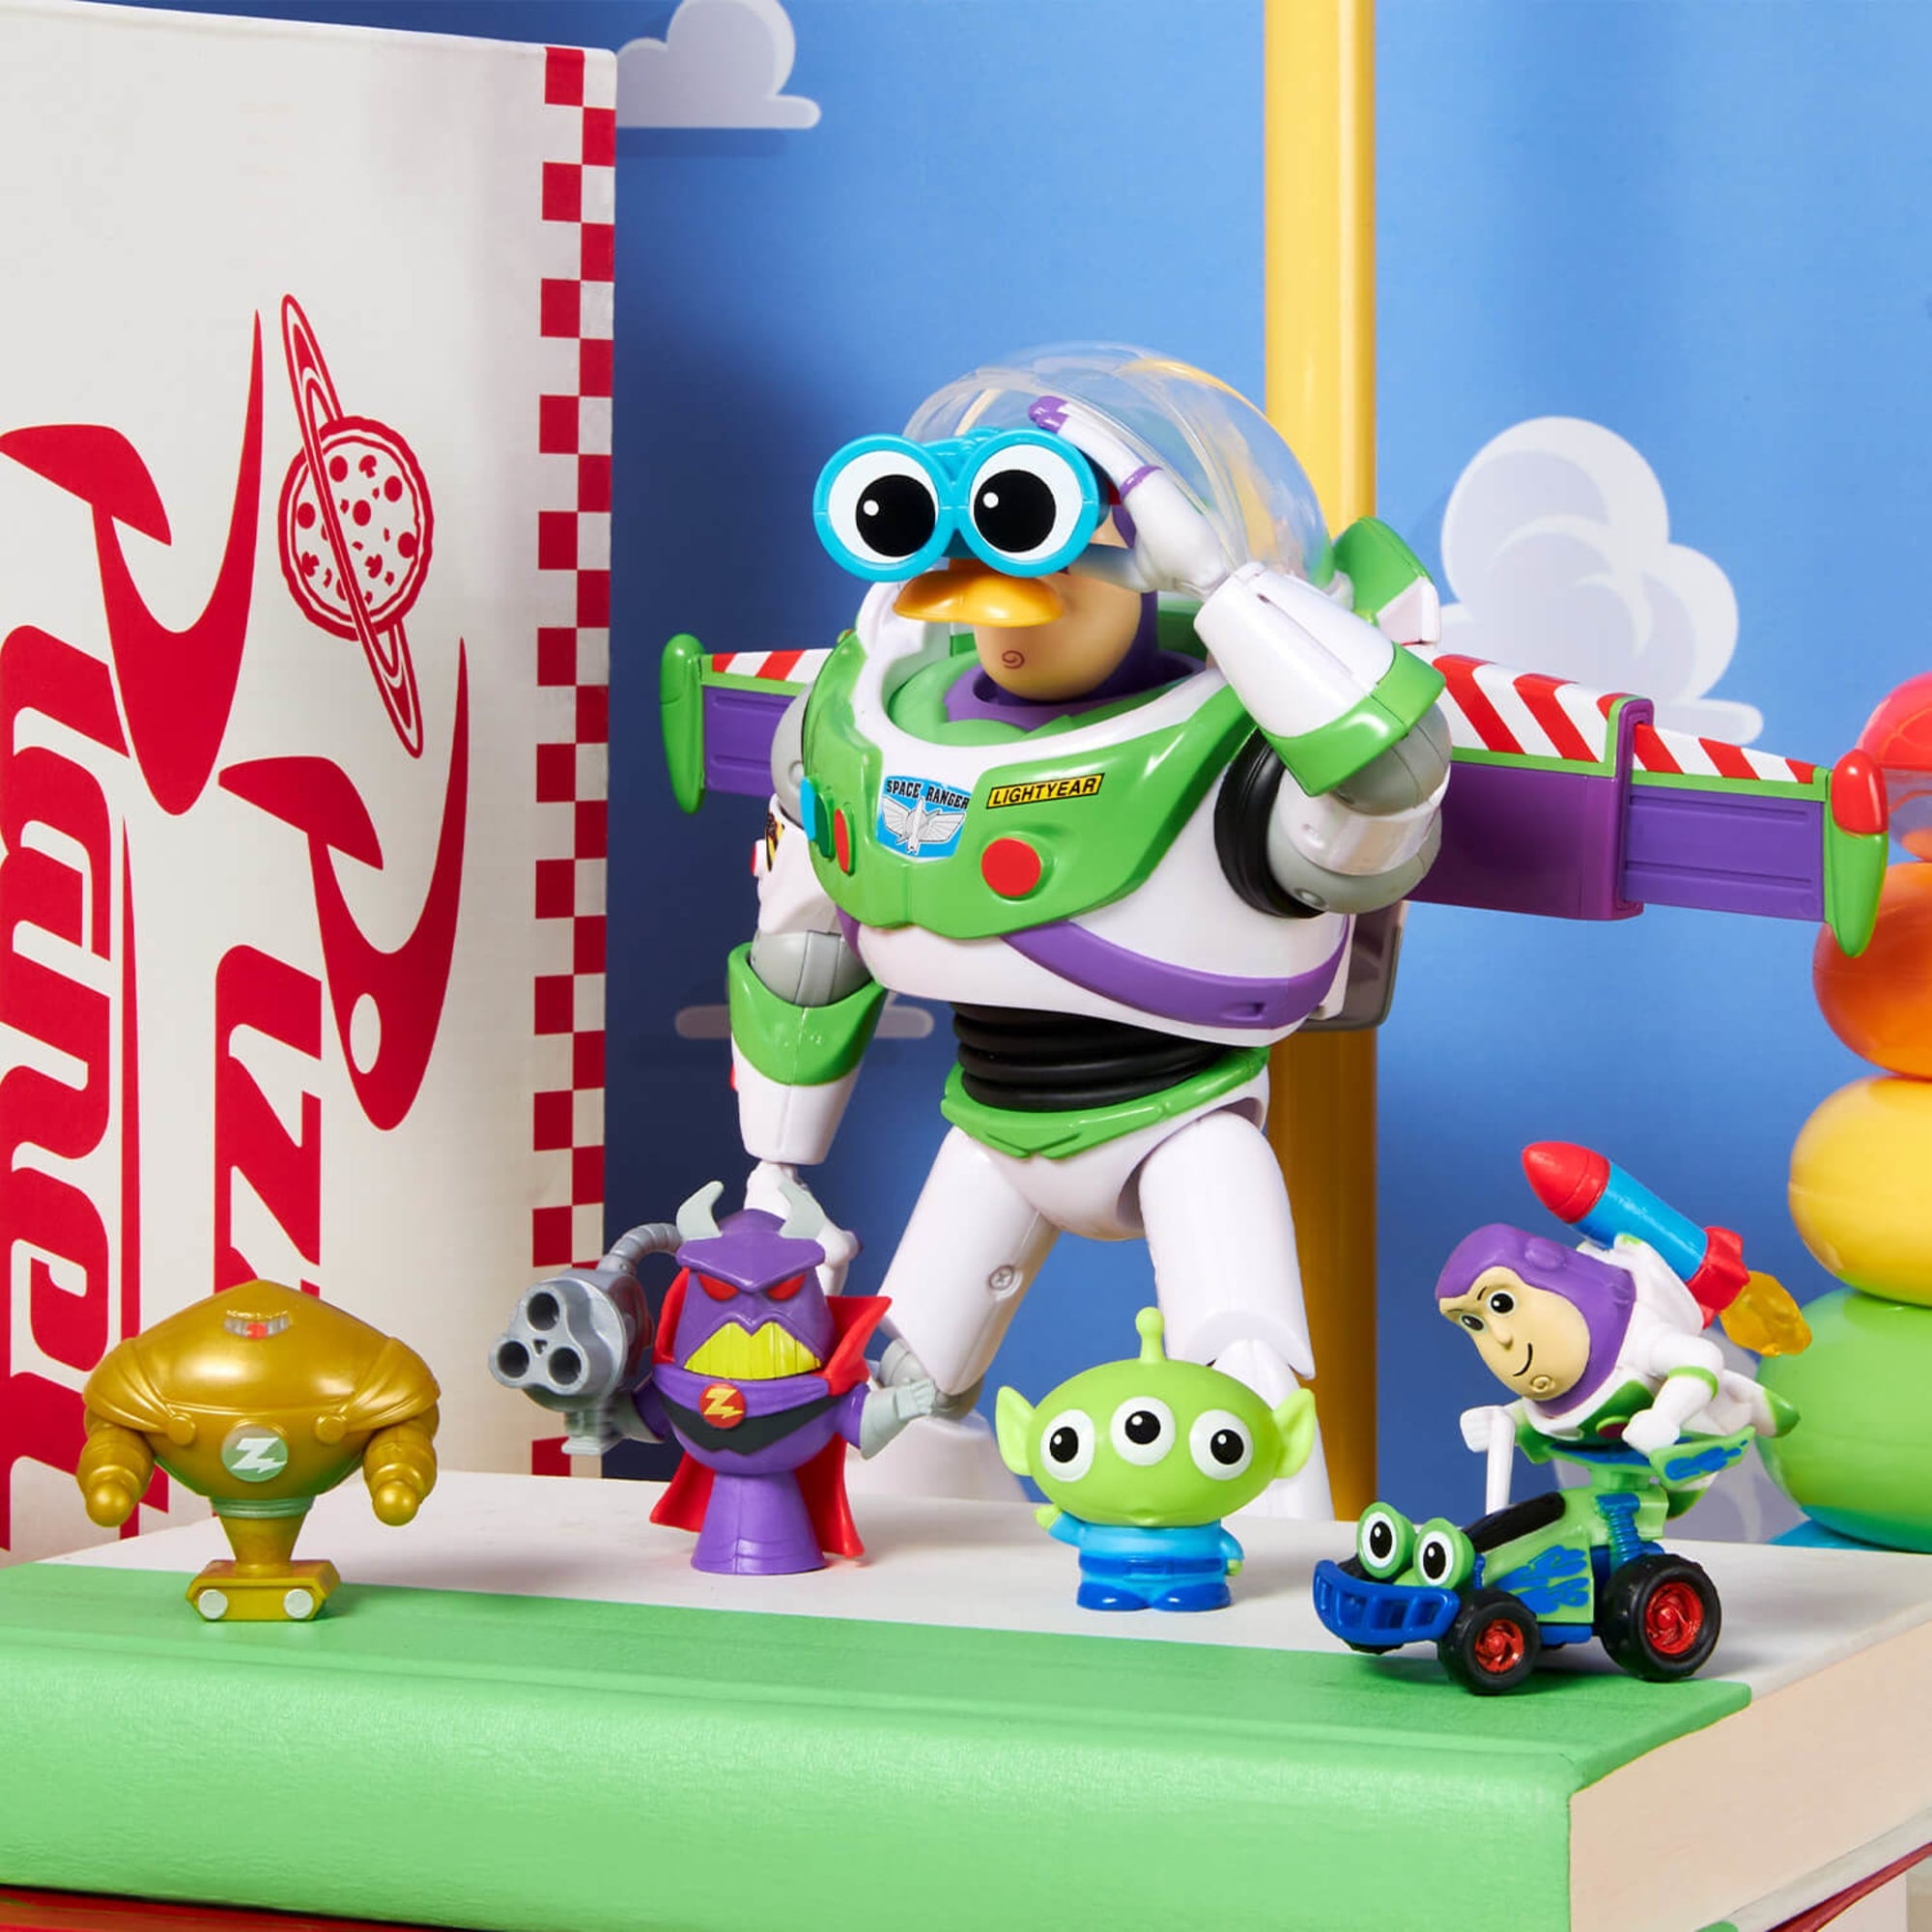 All I want for Christmas? All these Disney collaboration items!